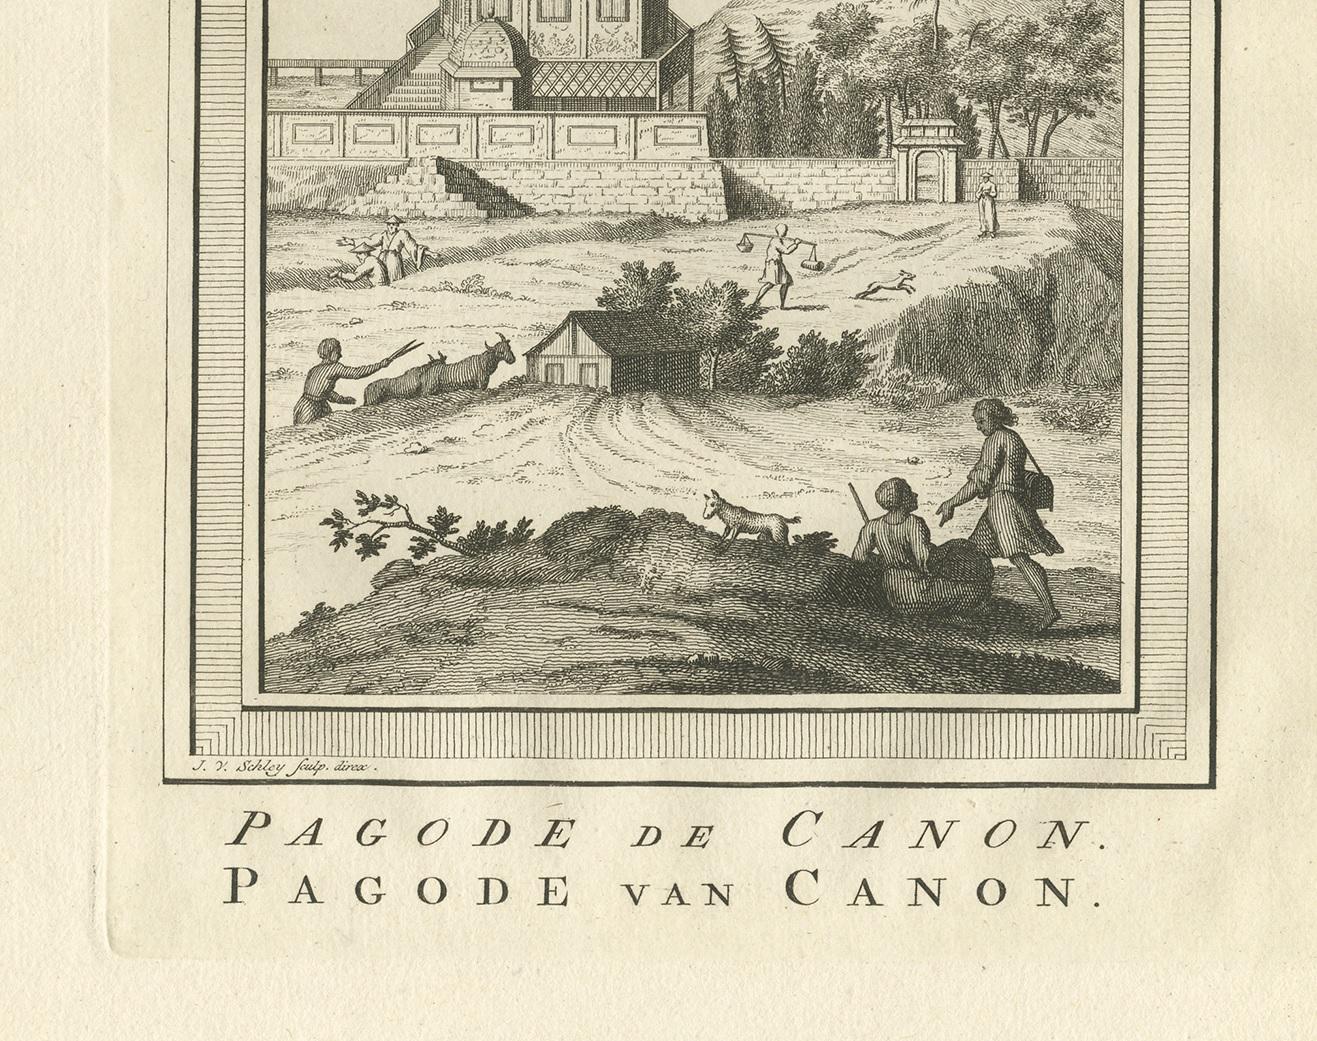 Antique print titled 'Pagode de Canon - Pagode van Canon'. Old print depicting the pagoda of Canon, Japan. This print originates from 'Histoire générale des Voyages' by A. Prévost.